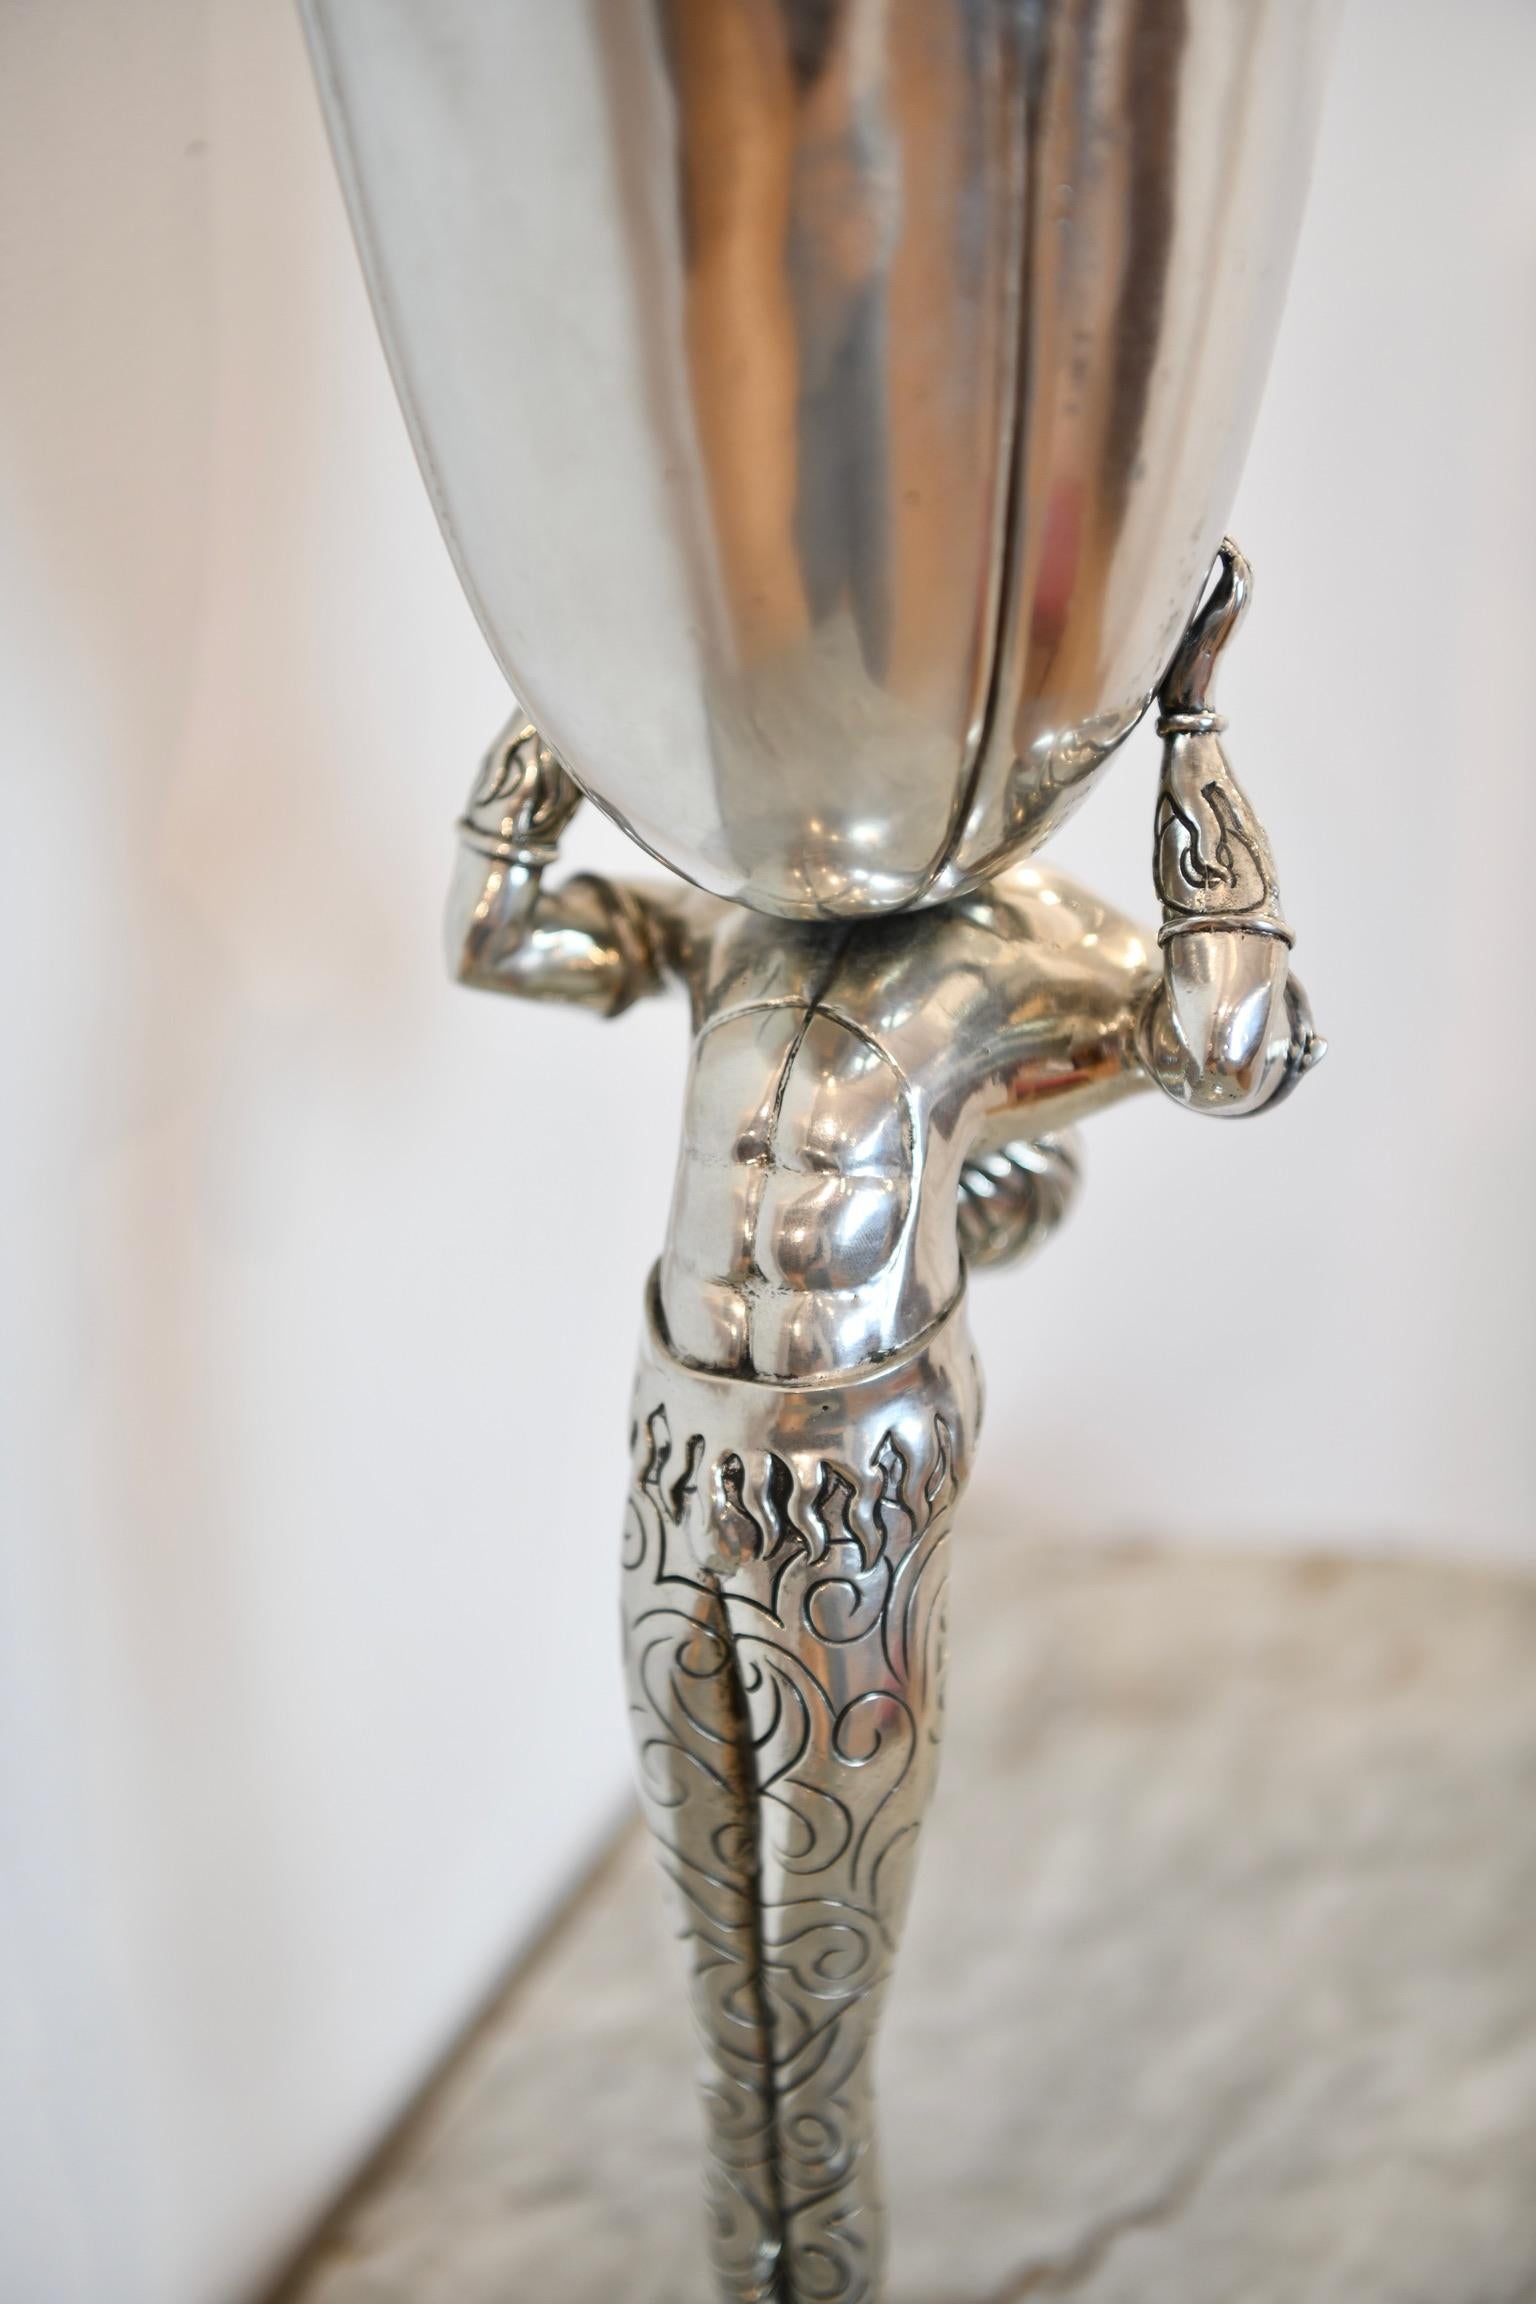 Acrobat Pewter Vase by Piero Figura for Atena, Milan In Good Condition For Sale In Brooklyn, NY